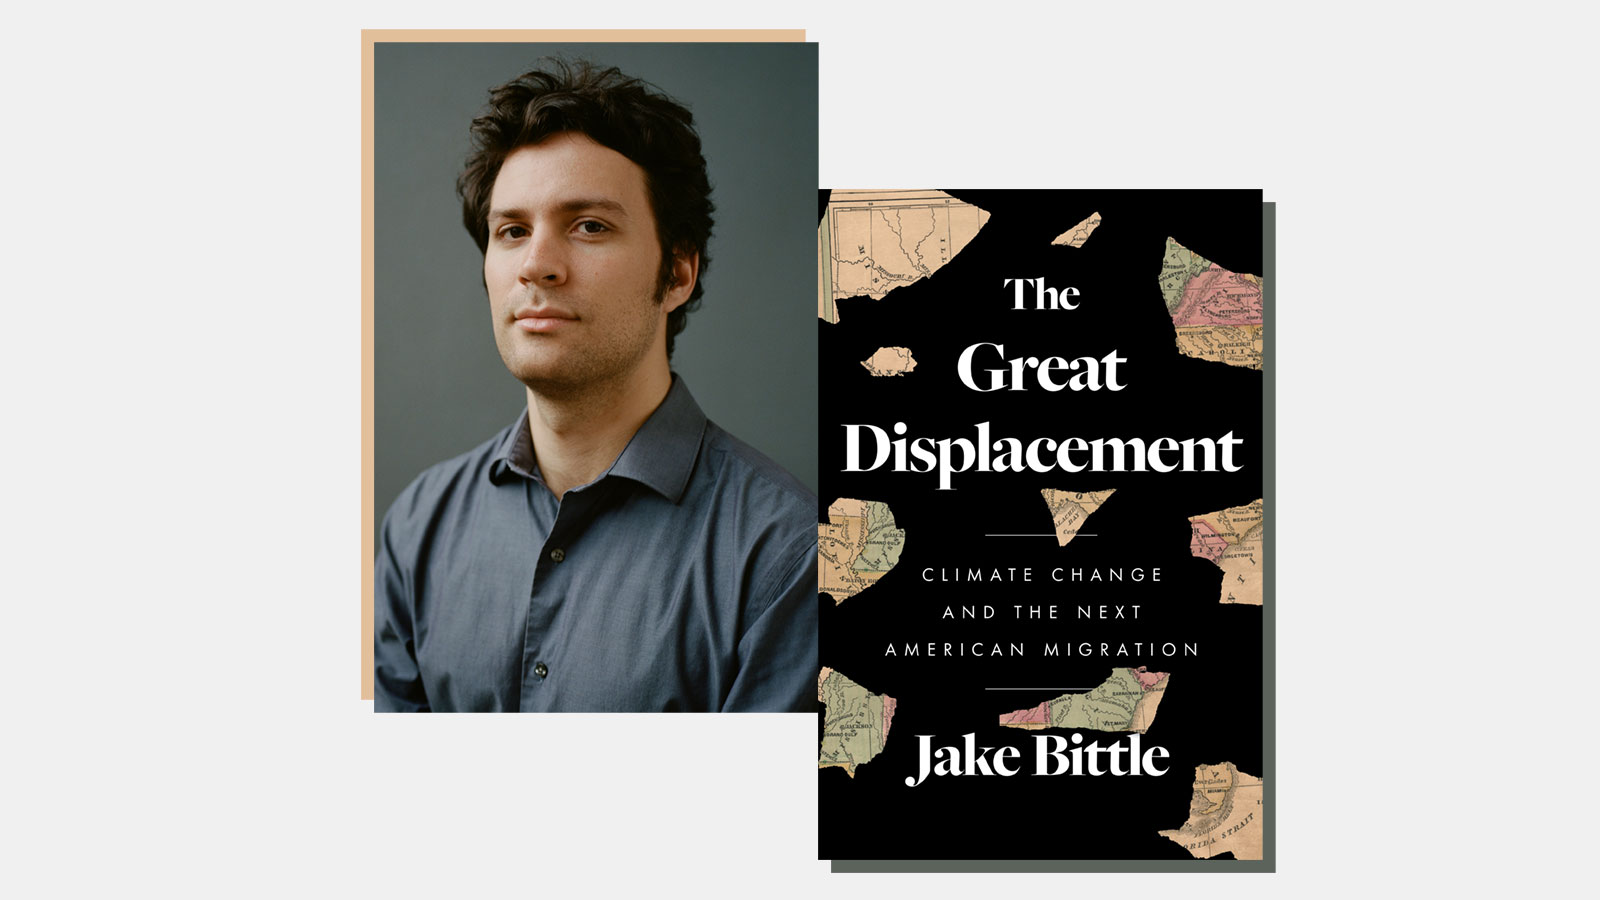 a photo of a man in a gray button up shirt on th left and a book cover called the great displacement on the right